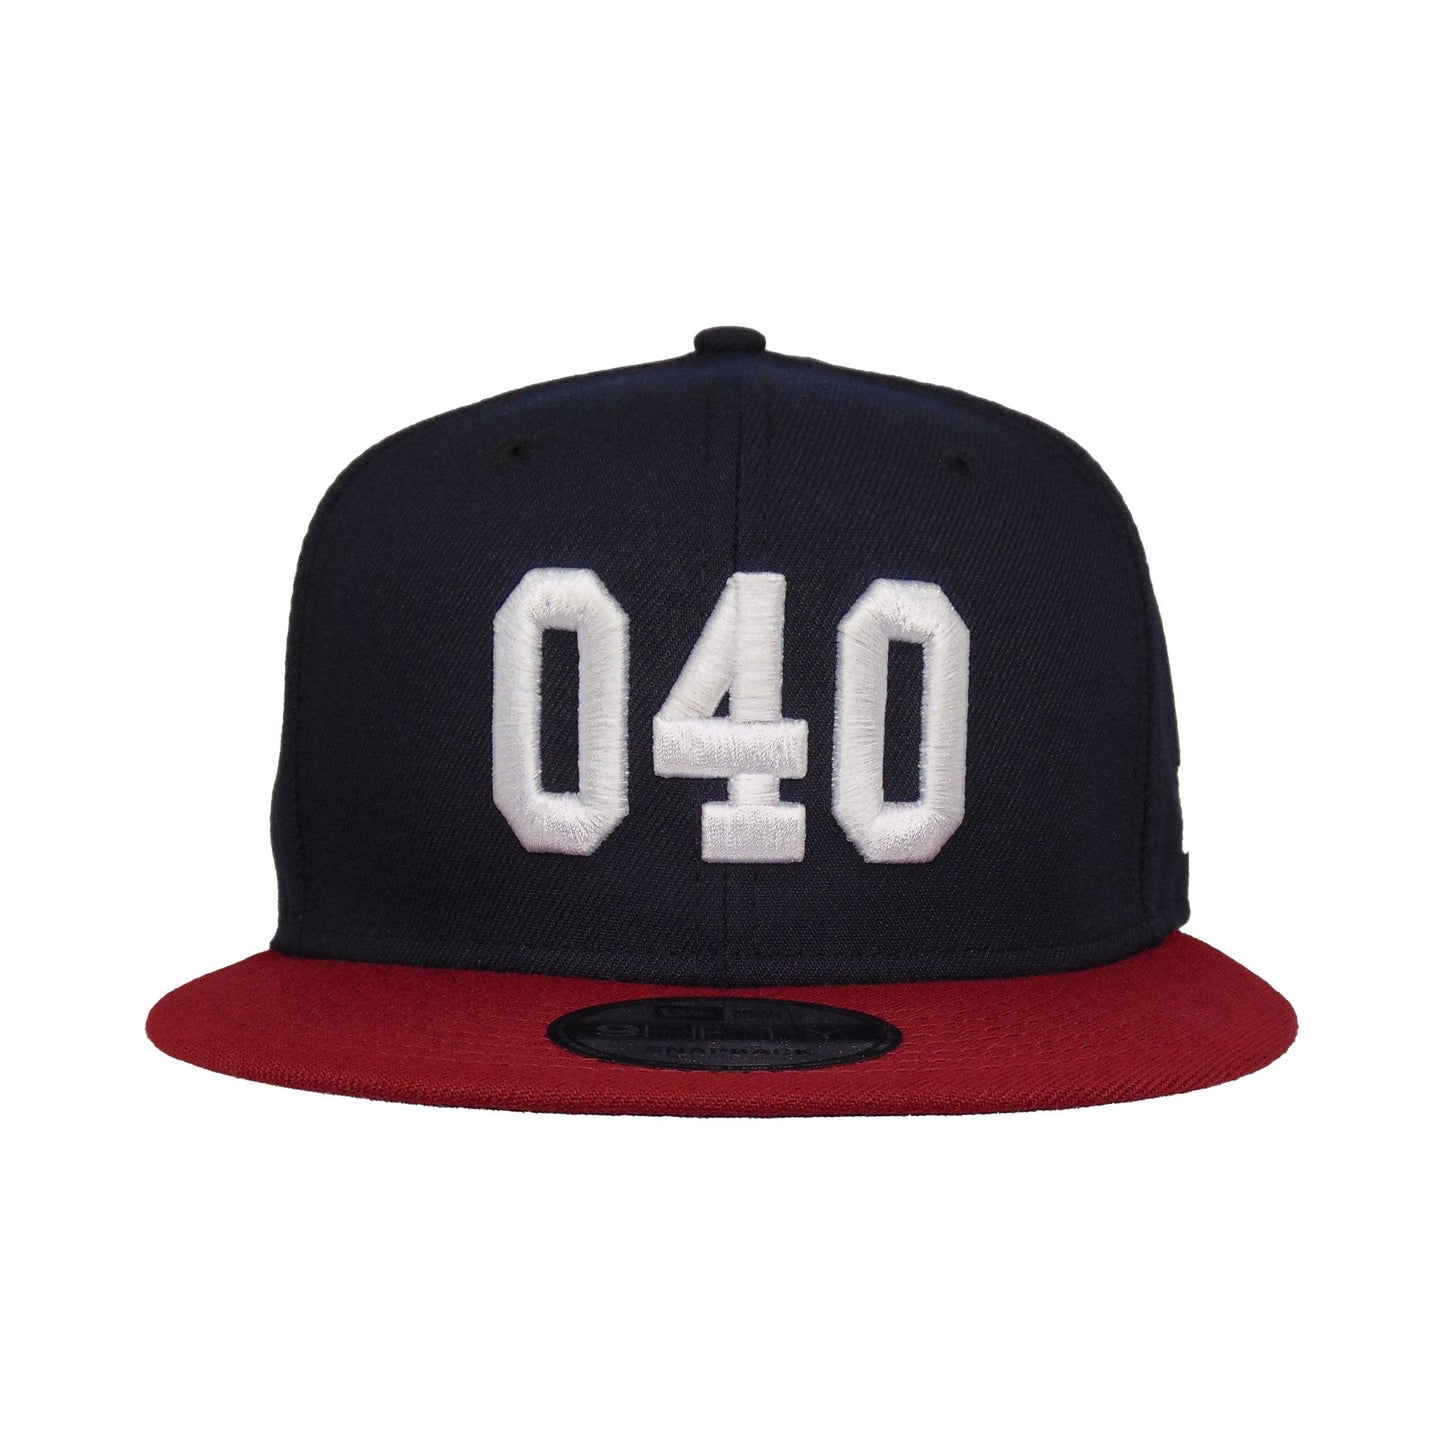 JustFitteds 040 9FIFTY New Era Cap Navy